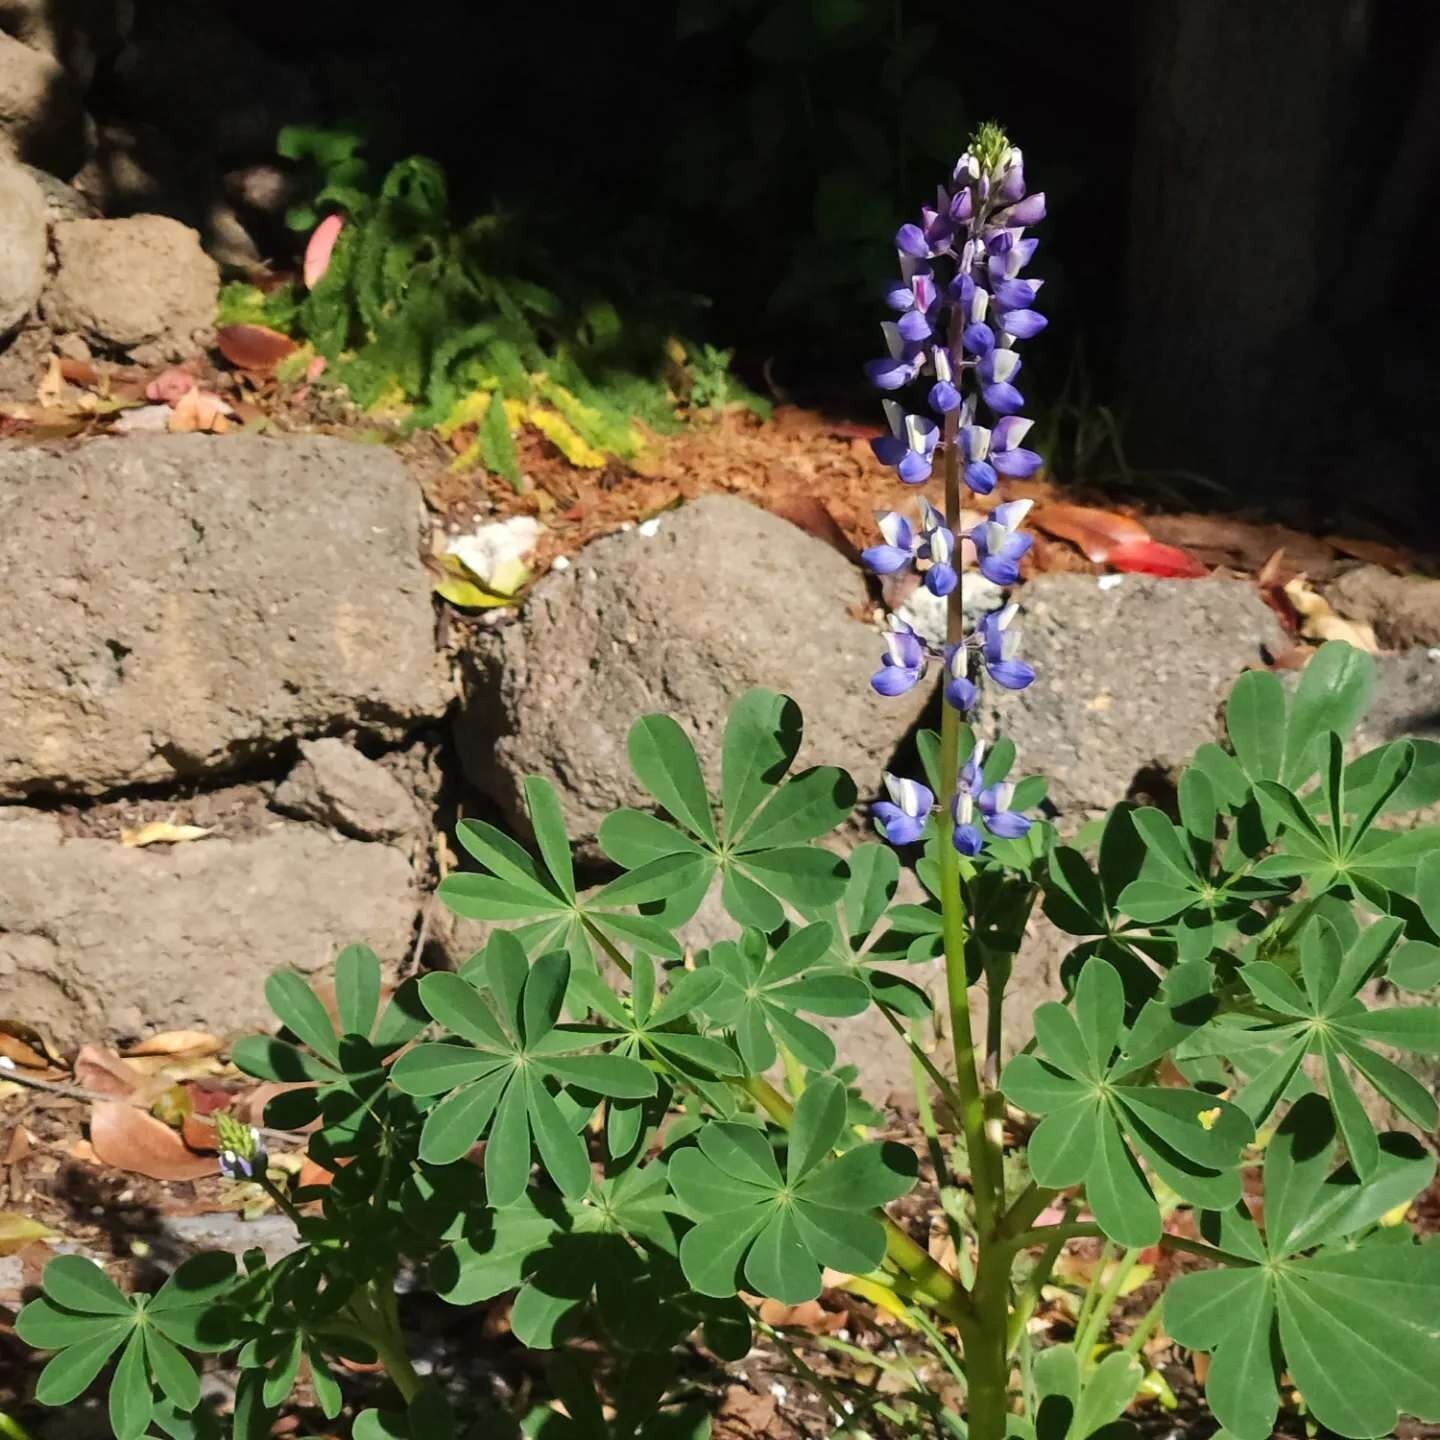 Succulent Lupine (Lupinus succulentus)

Also know as Arroyo Lupine, this water tolerant annual can come in shades of purple, pink, and white and grow up to a meter tall. 

It will tolerate part sun but will always tilt for maximum sun exposure so ful